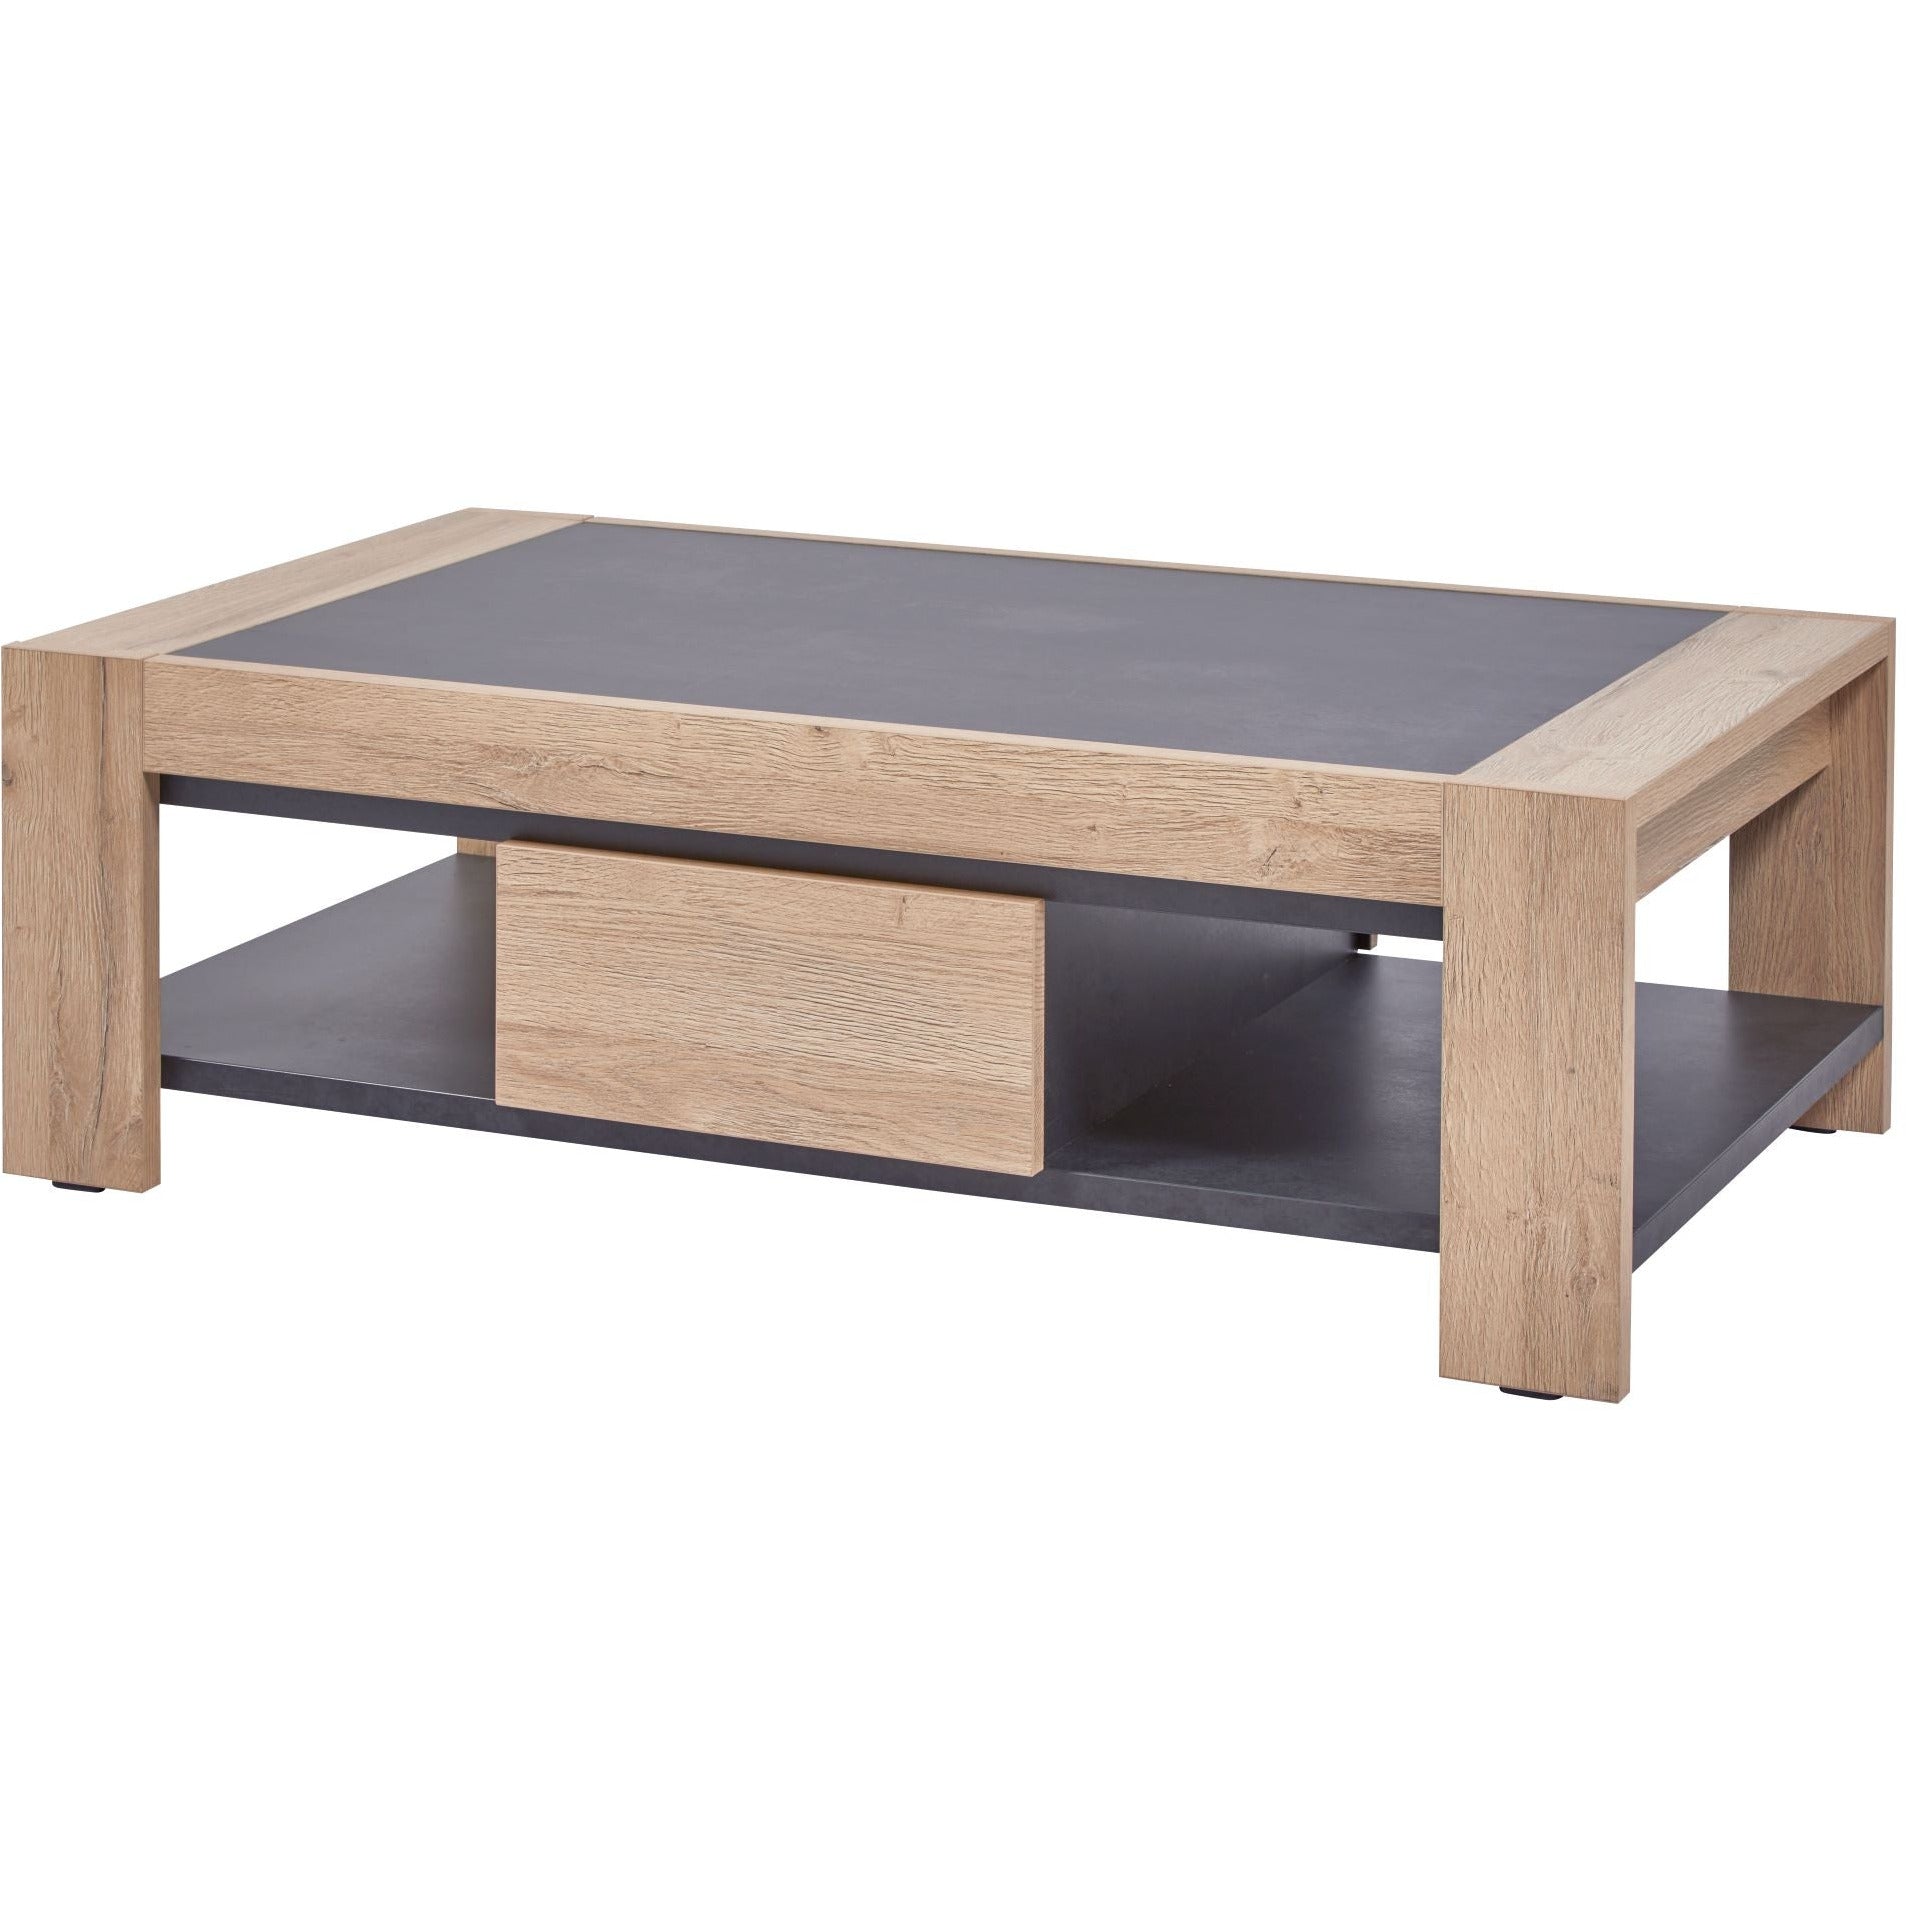 Coffee table | Furniture series Fugue | Natural, gray, brown | 120